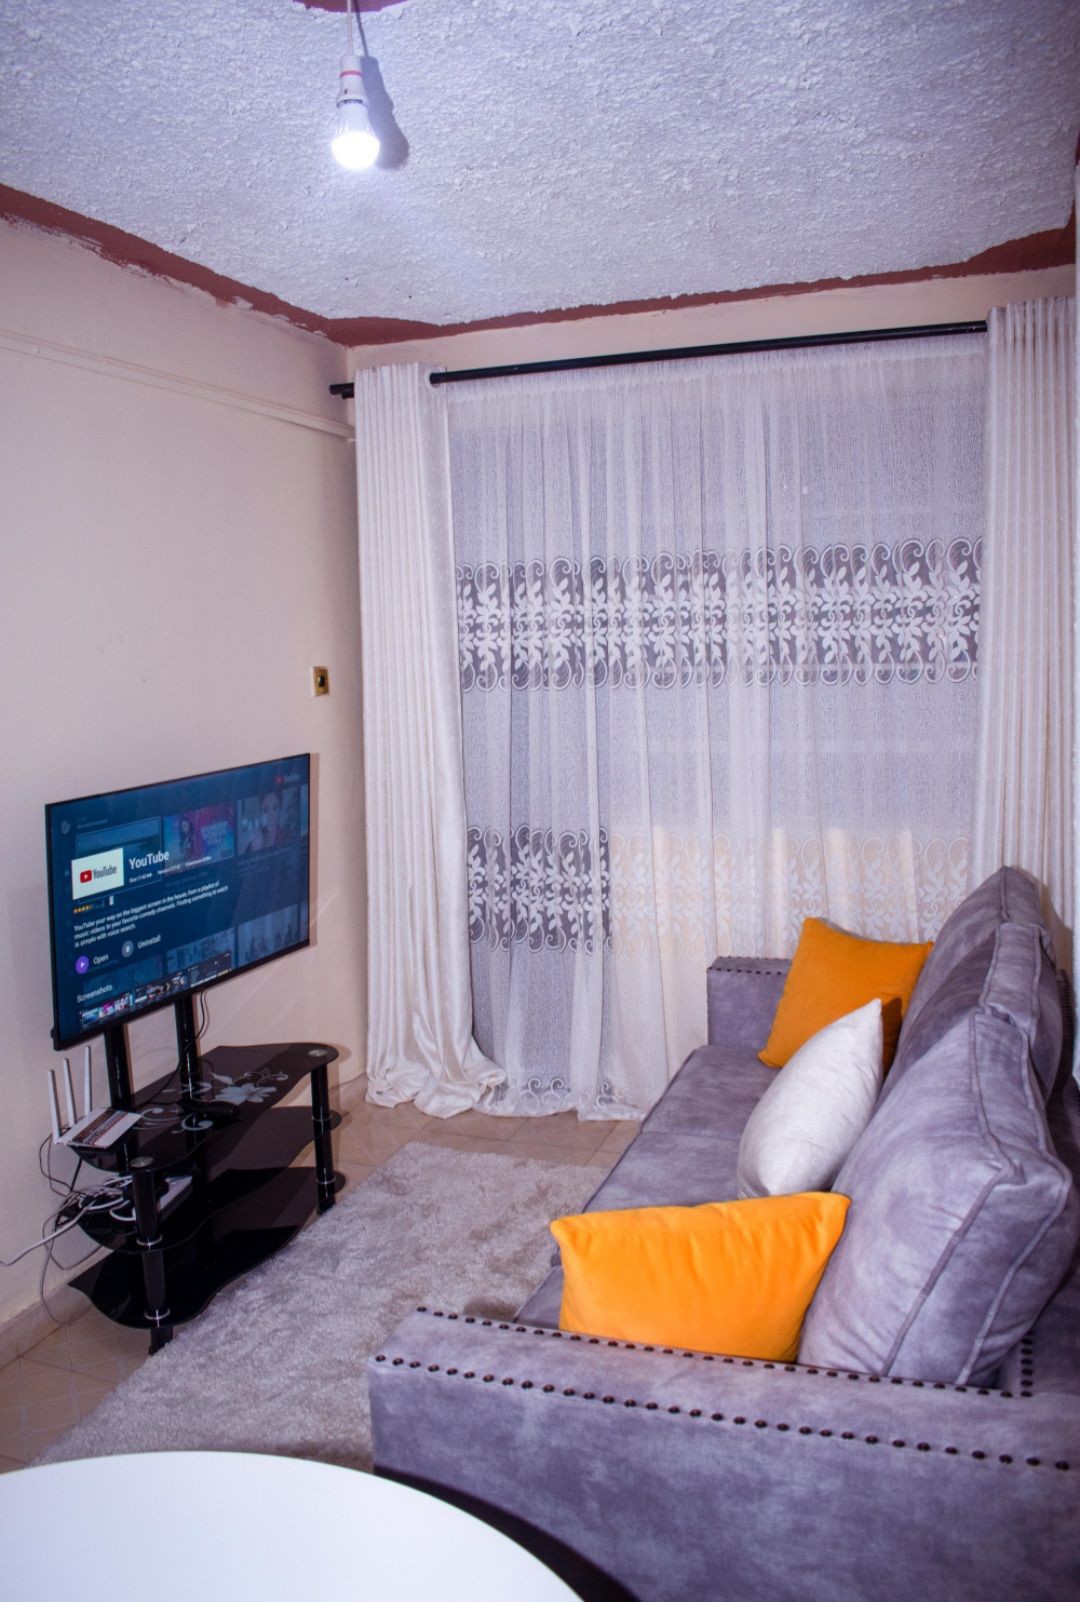 Muindi Residence
2 bedrooms 2 bed